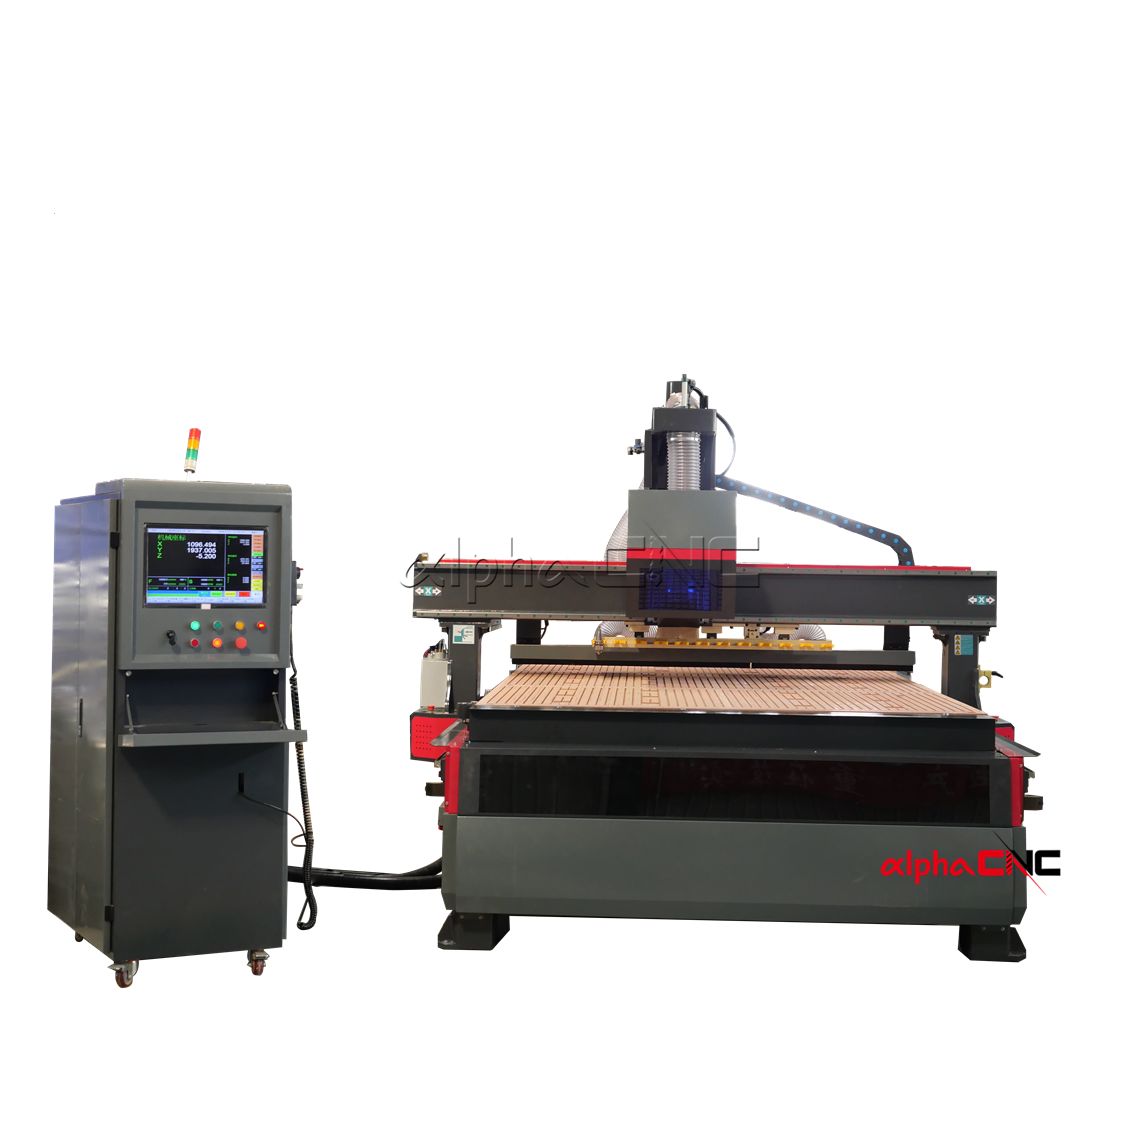 2000*3000mm Wood Cutting Machine CNC Router 3 Axis ATC Wood Cabinet CNC Router 4*8ft CNC Router Woodworking Machine Price